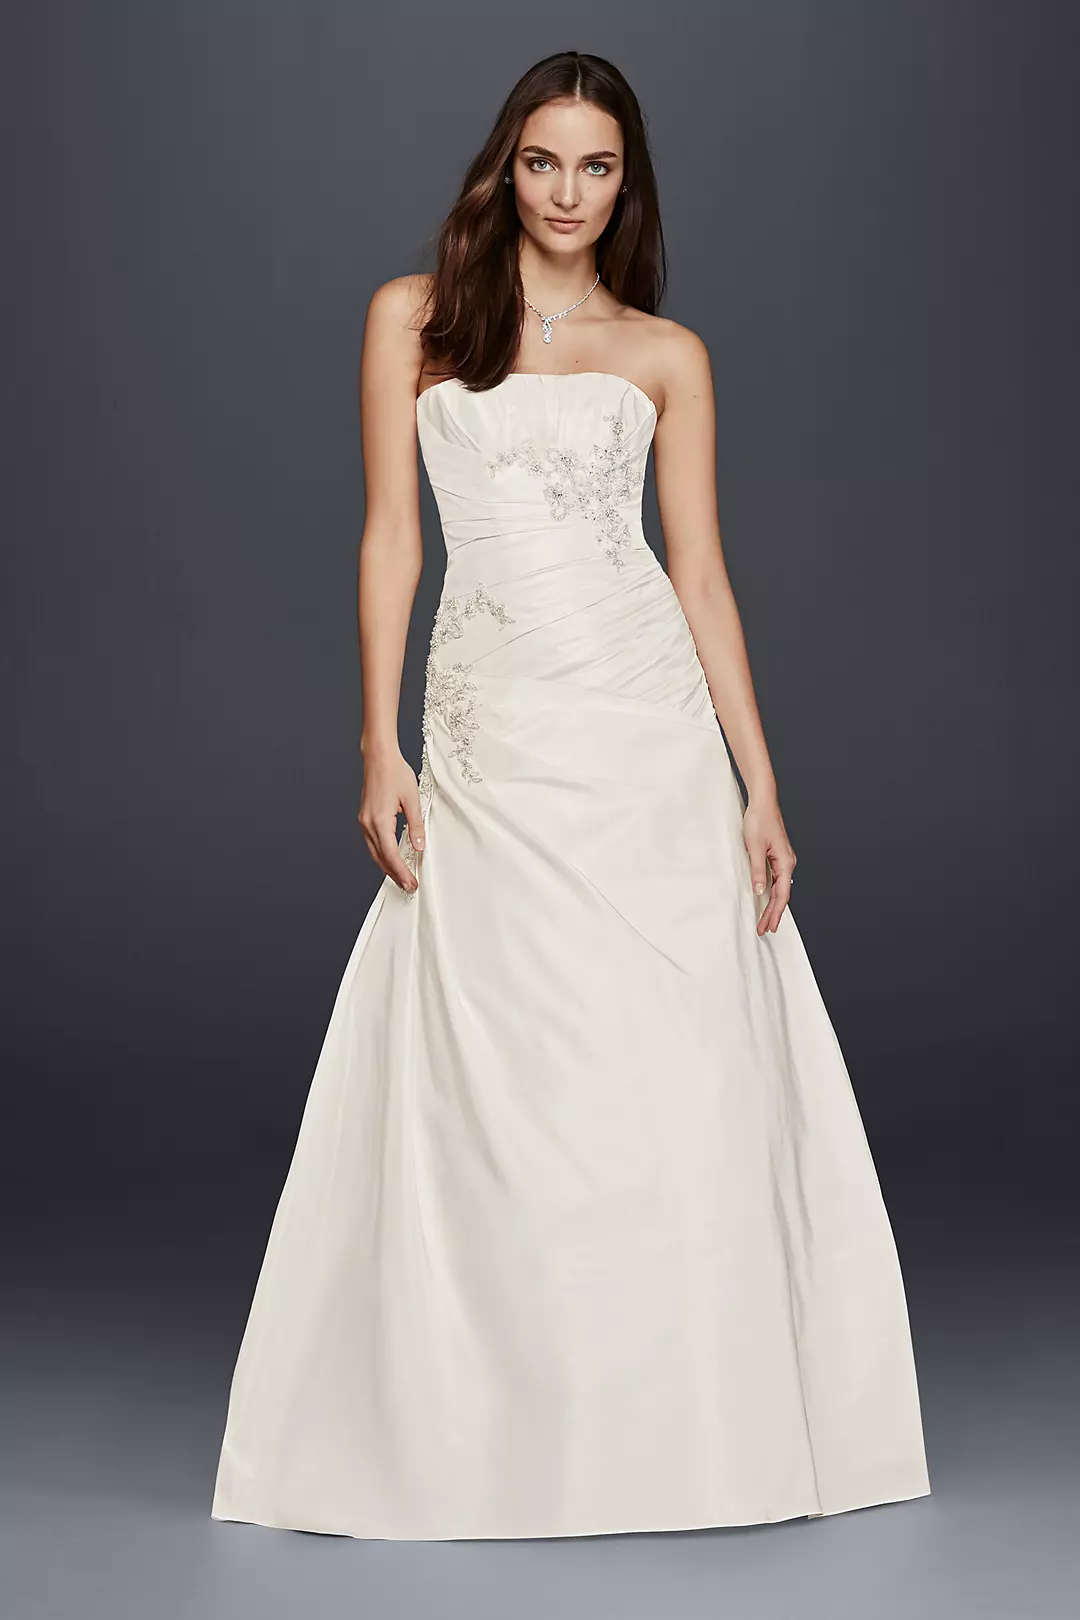 A-Line Wedding Dress with Ruching and Beading Image